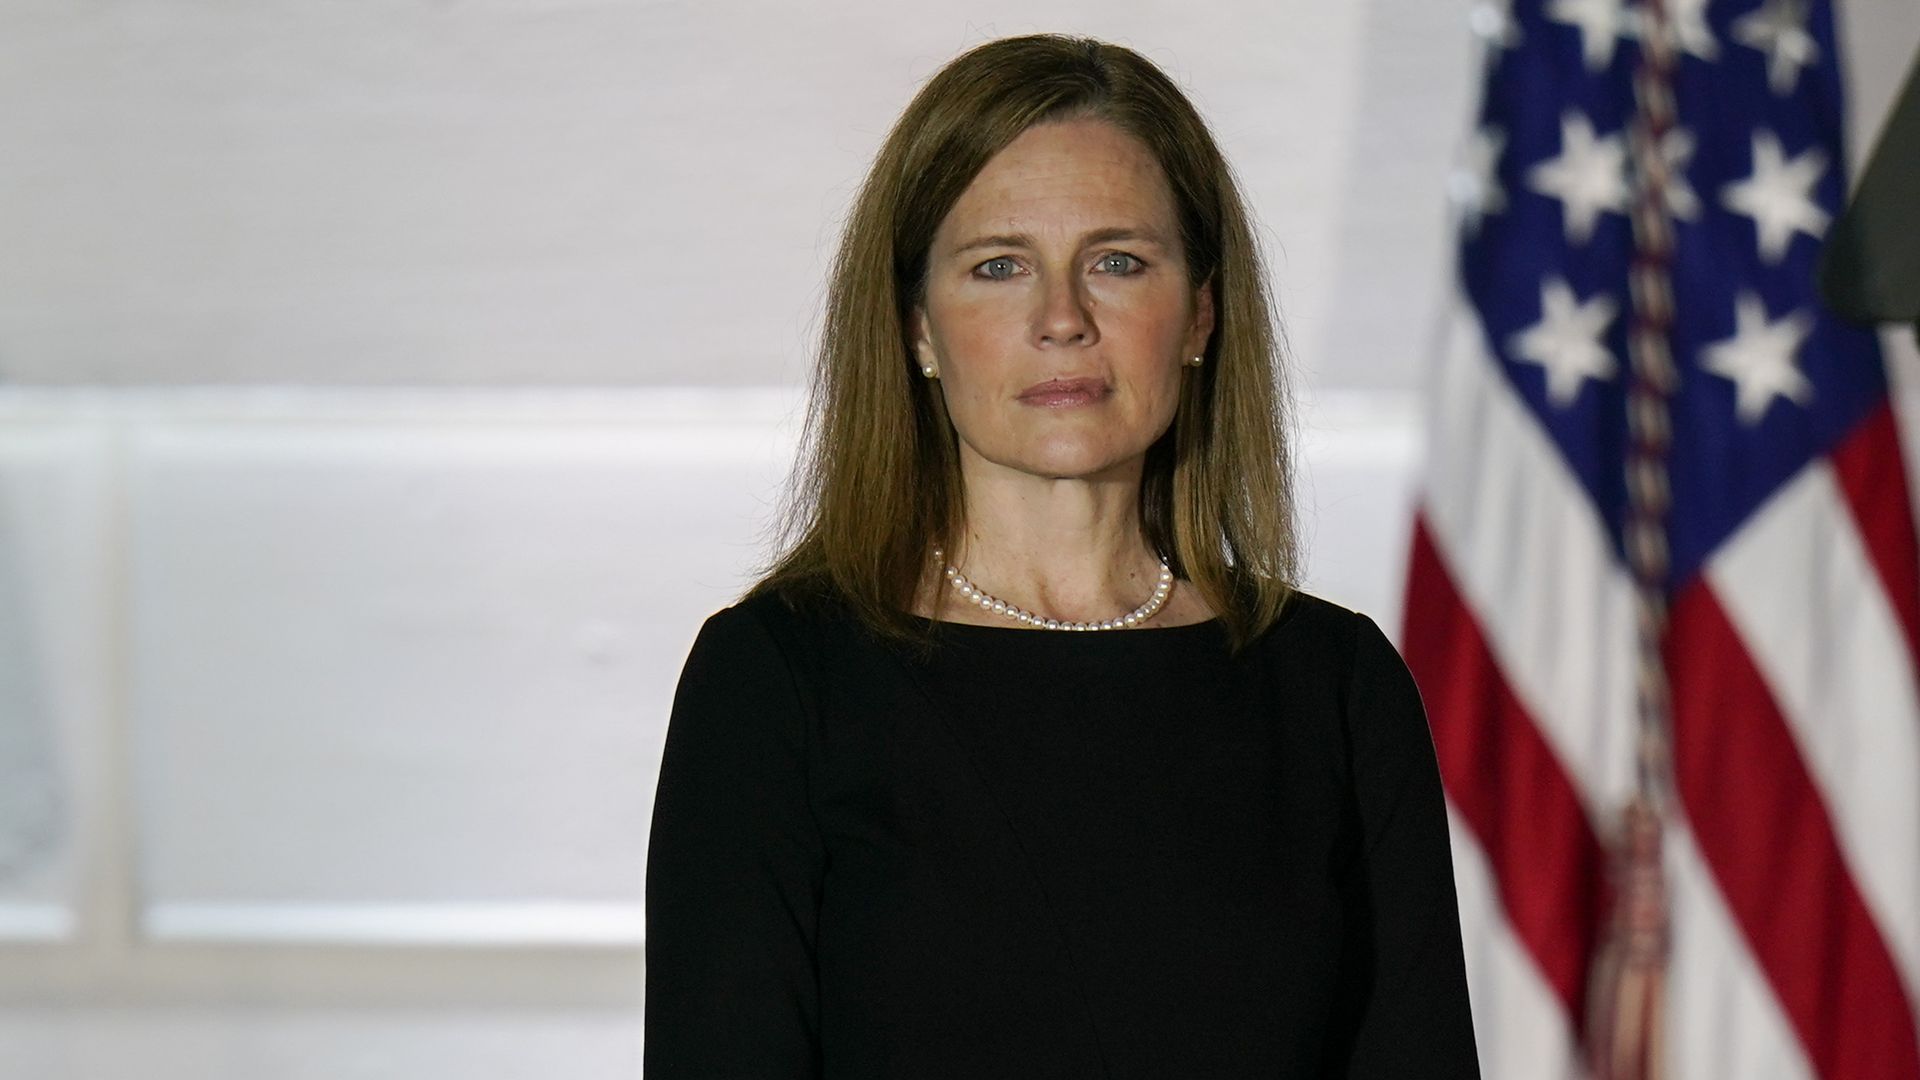 Amy Coney Barrett, associate justice of the U.S. Supreme Court, during a ceremony on the South Lawn of the White House in 2020.